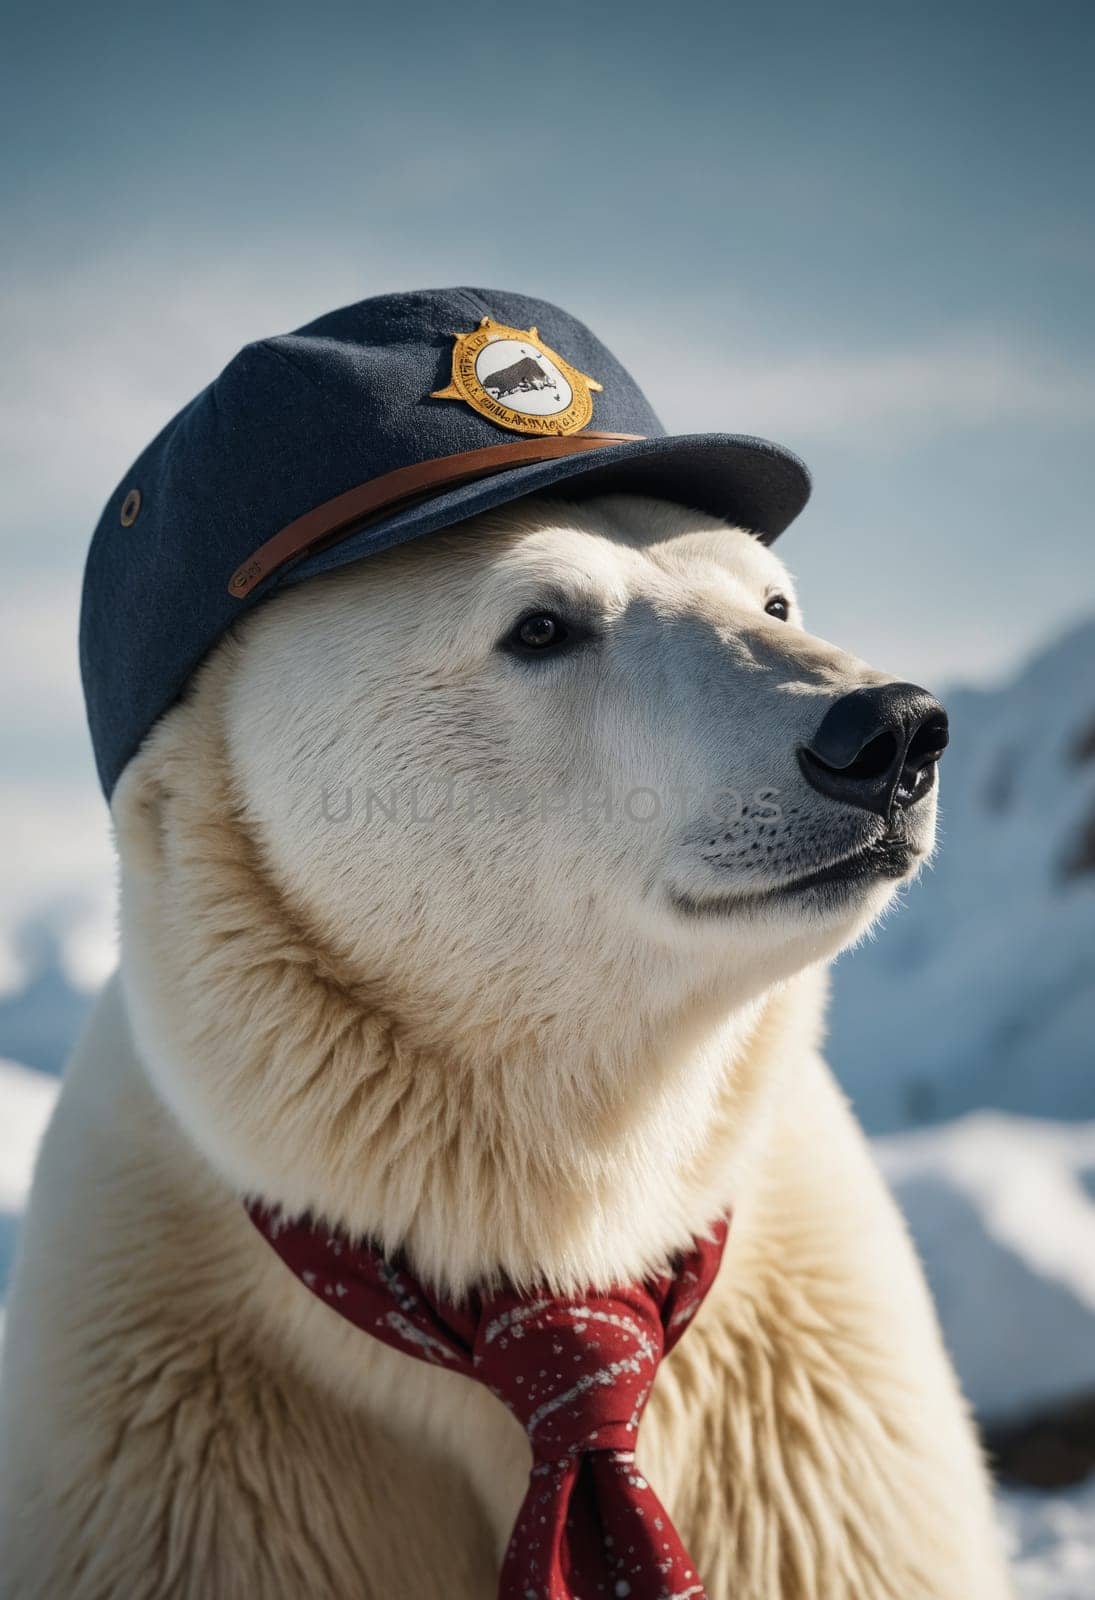 Furry Formality: A Polar Bear Donning a Striped Tie by Andre1ns